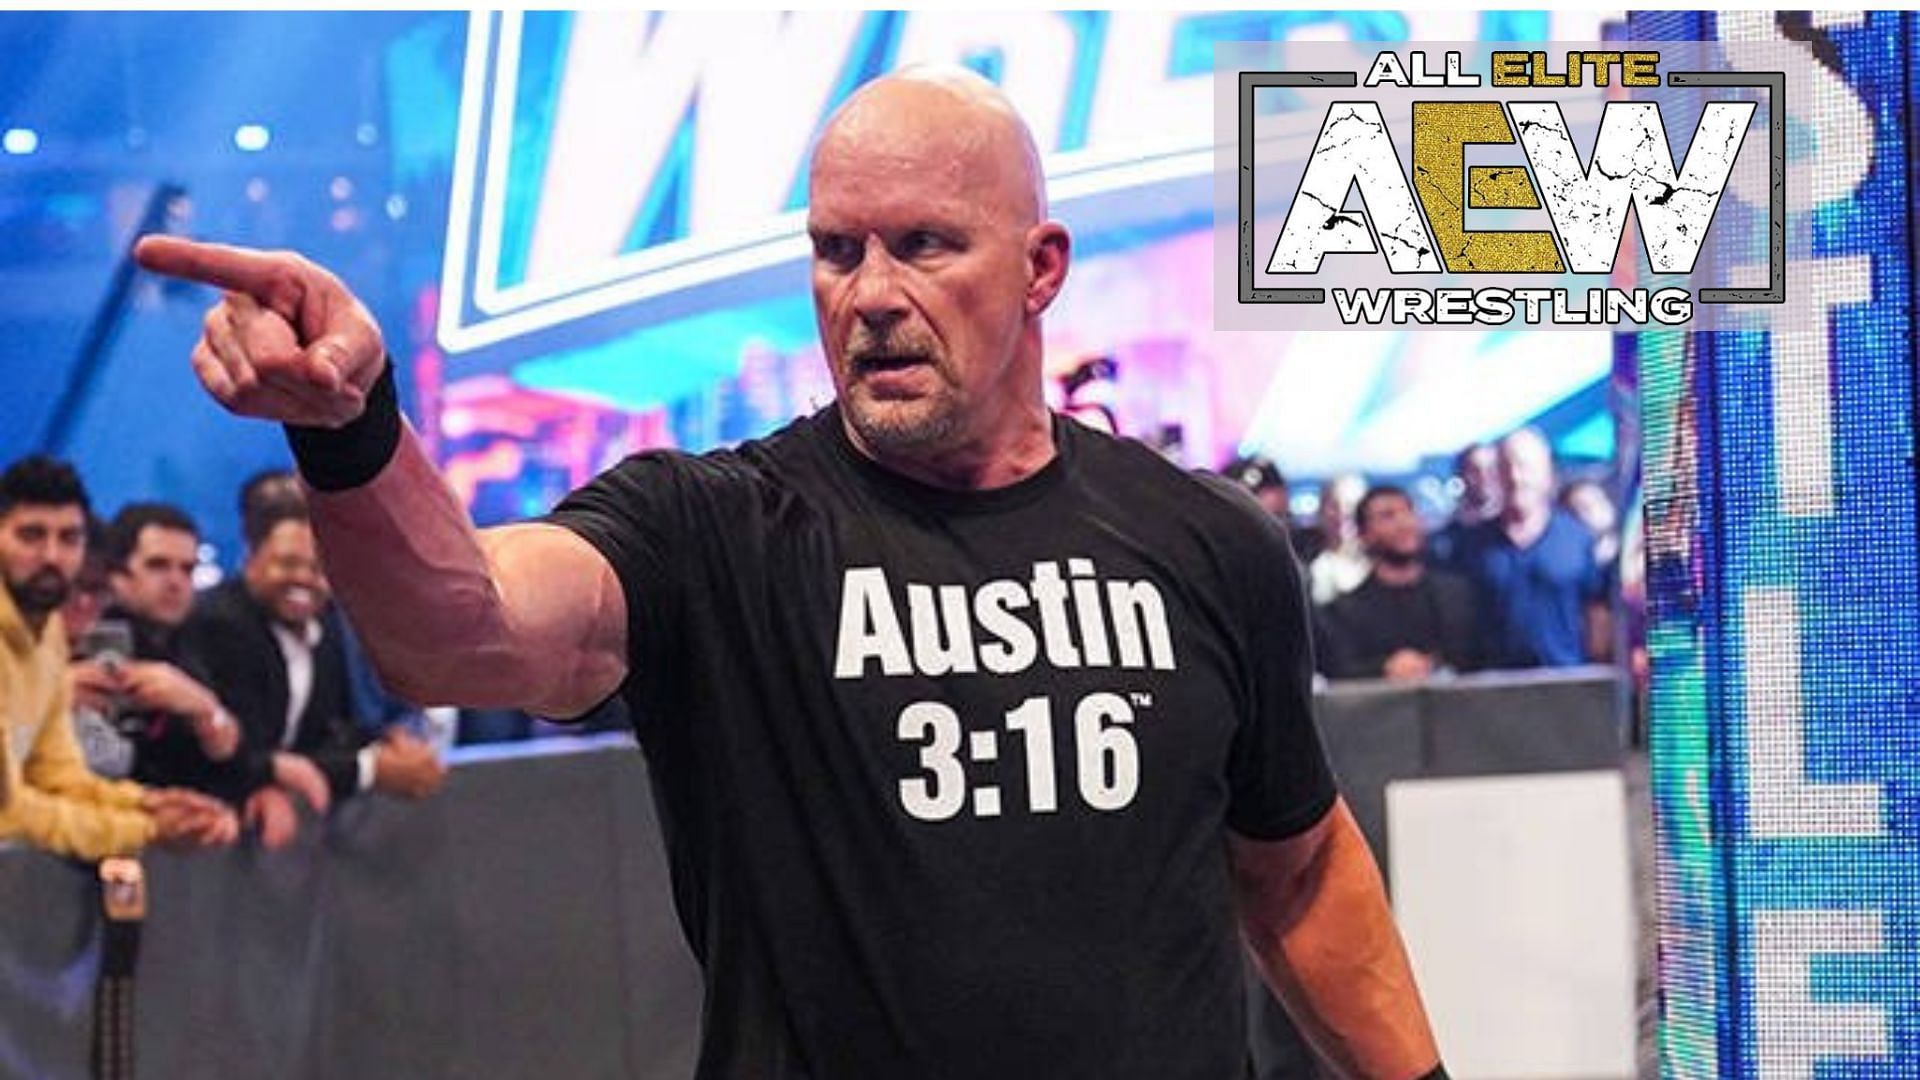 Stone Cold Steve Austin was namedropped in AEW this week!